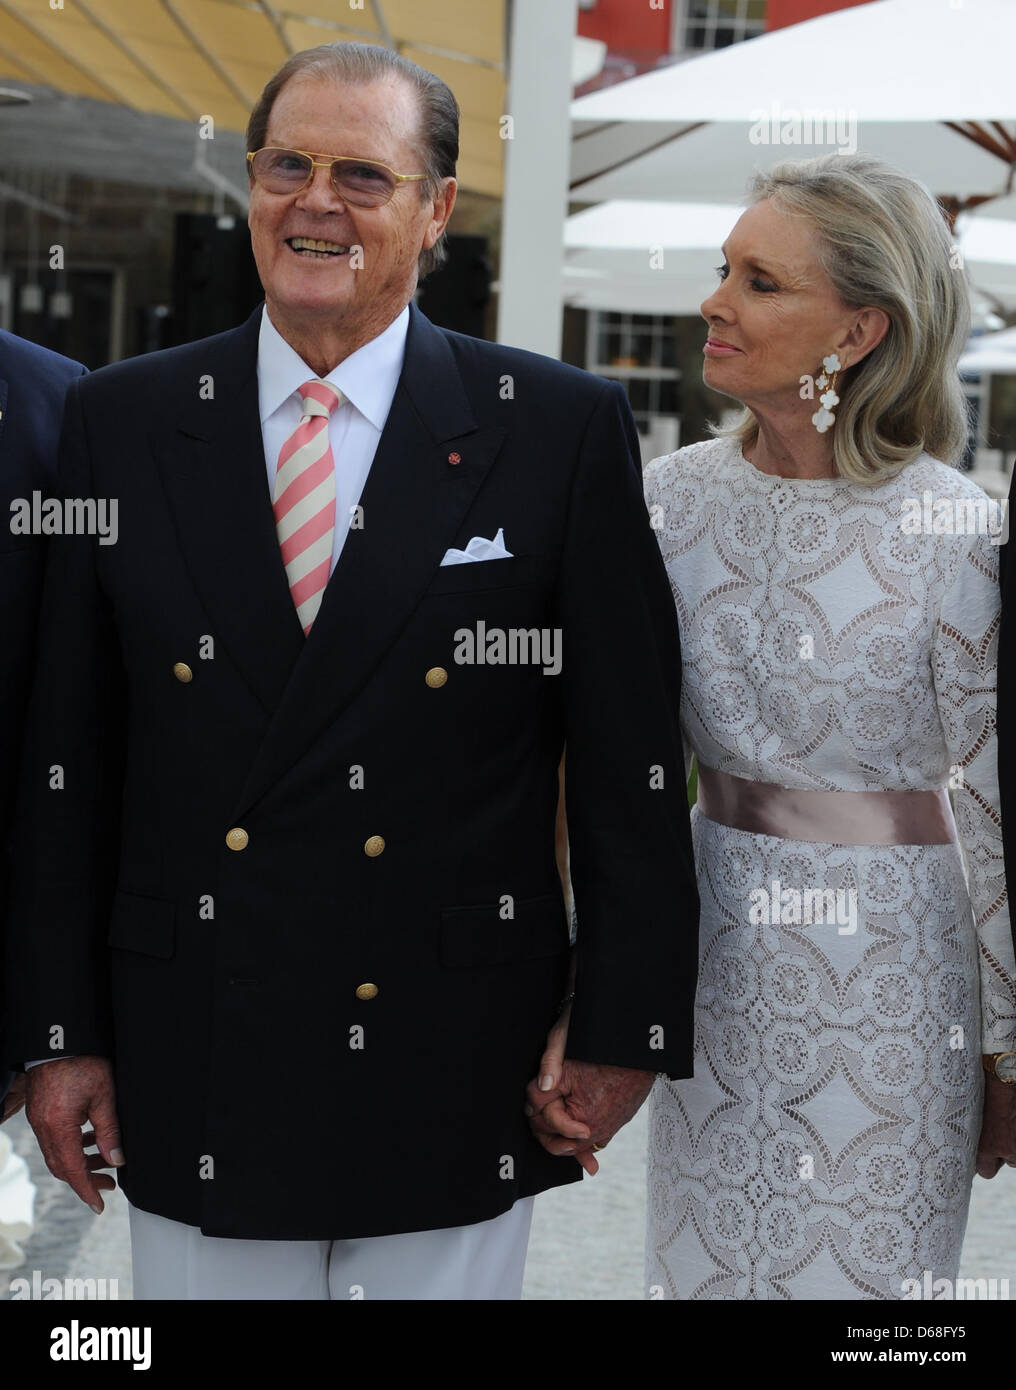 British actor Sir Roger Moore and his wife Kristina Tholstrup pose for the photographers in front of the new hotel 'Bell Rock' at theme park Europa Park in Rust, Germany, 12 July 2012. Photo: Patrick Seeger Stock Photo